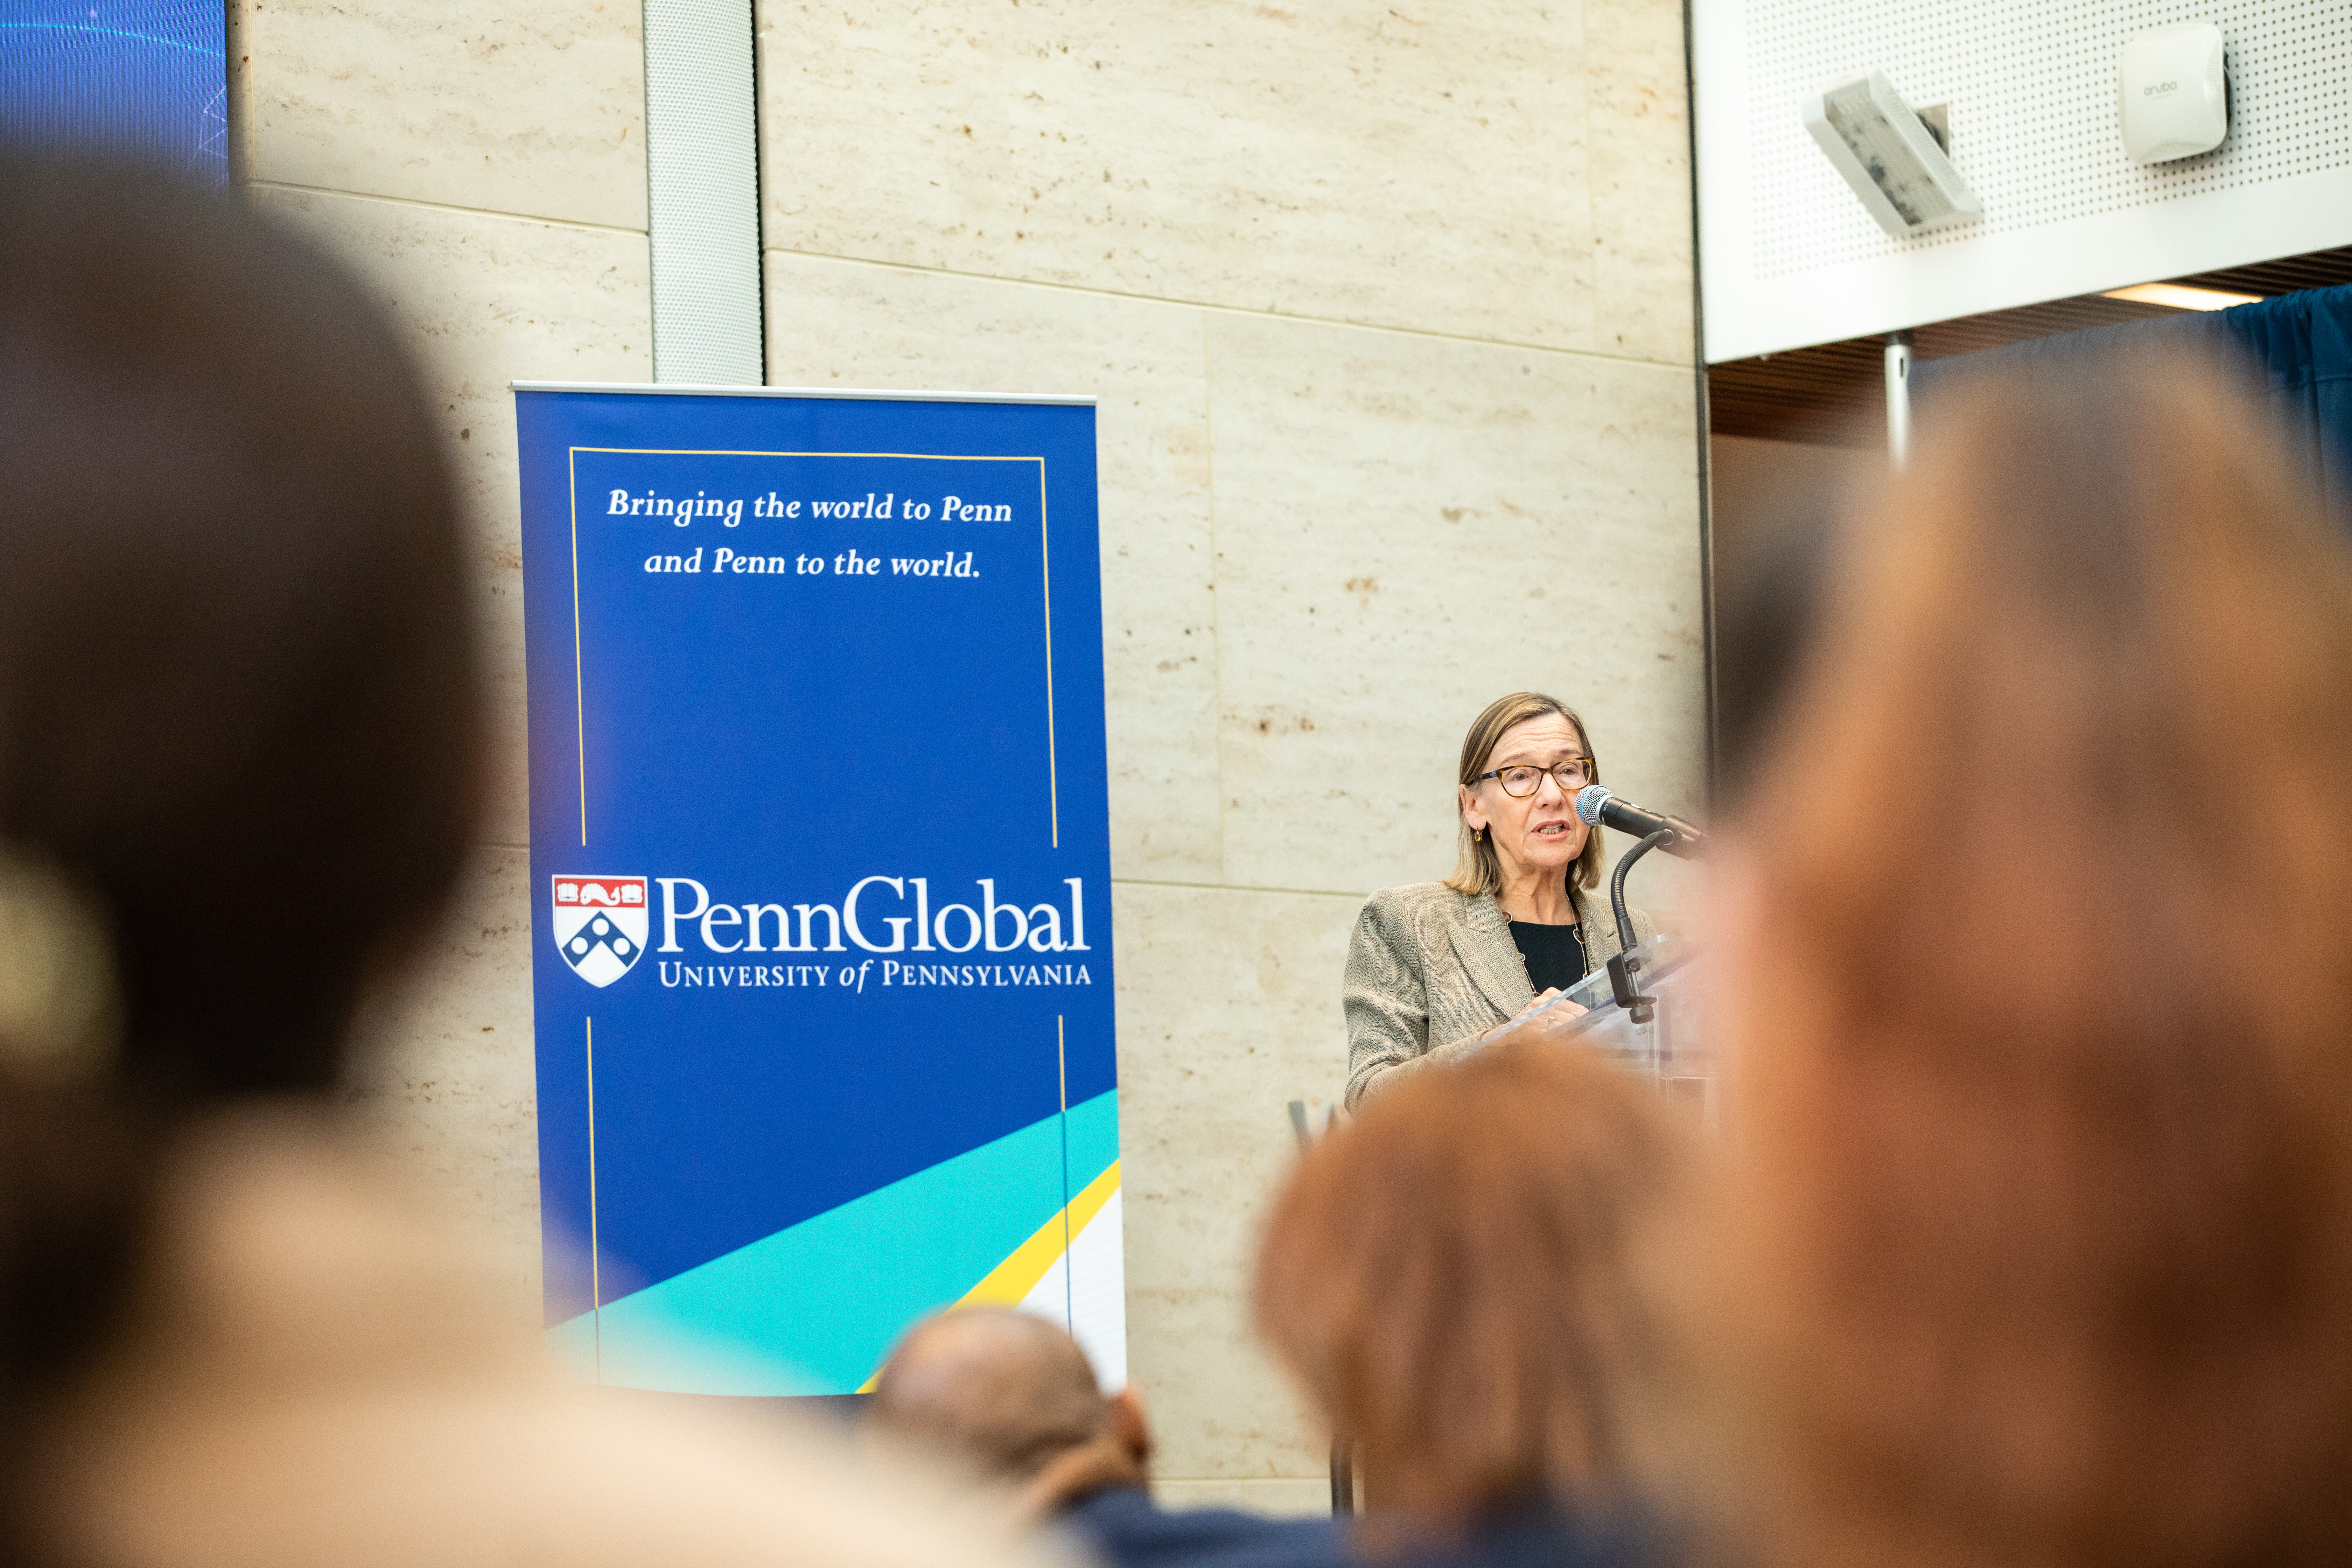 Dean Pam Grossman speaking at podium with sign behind her that says PennGlobal